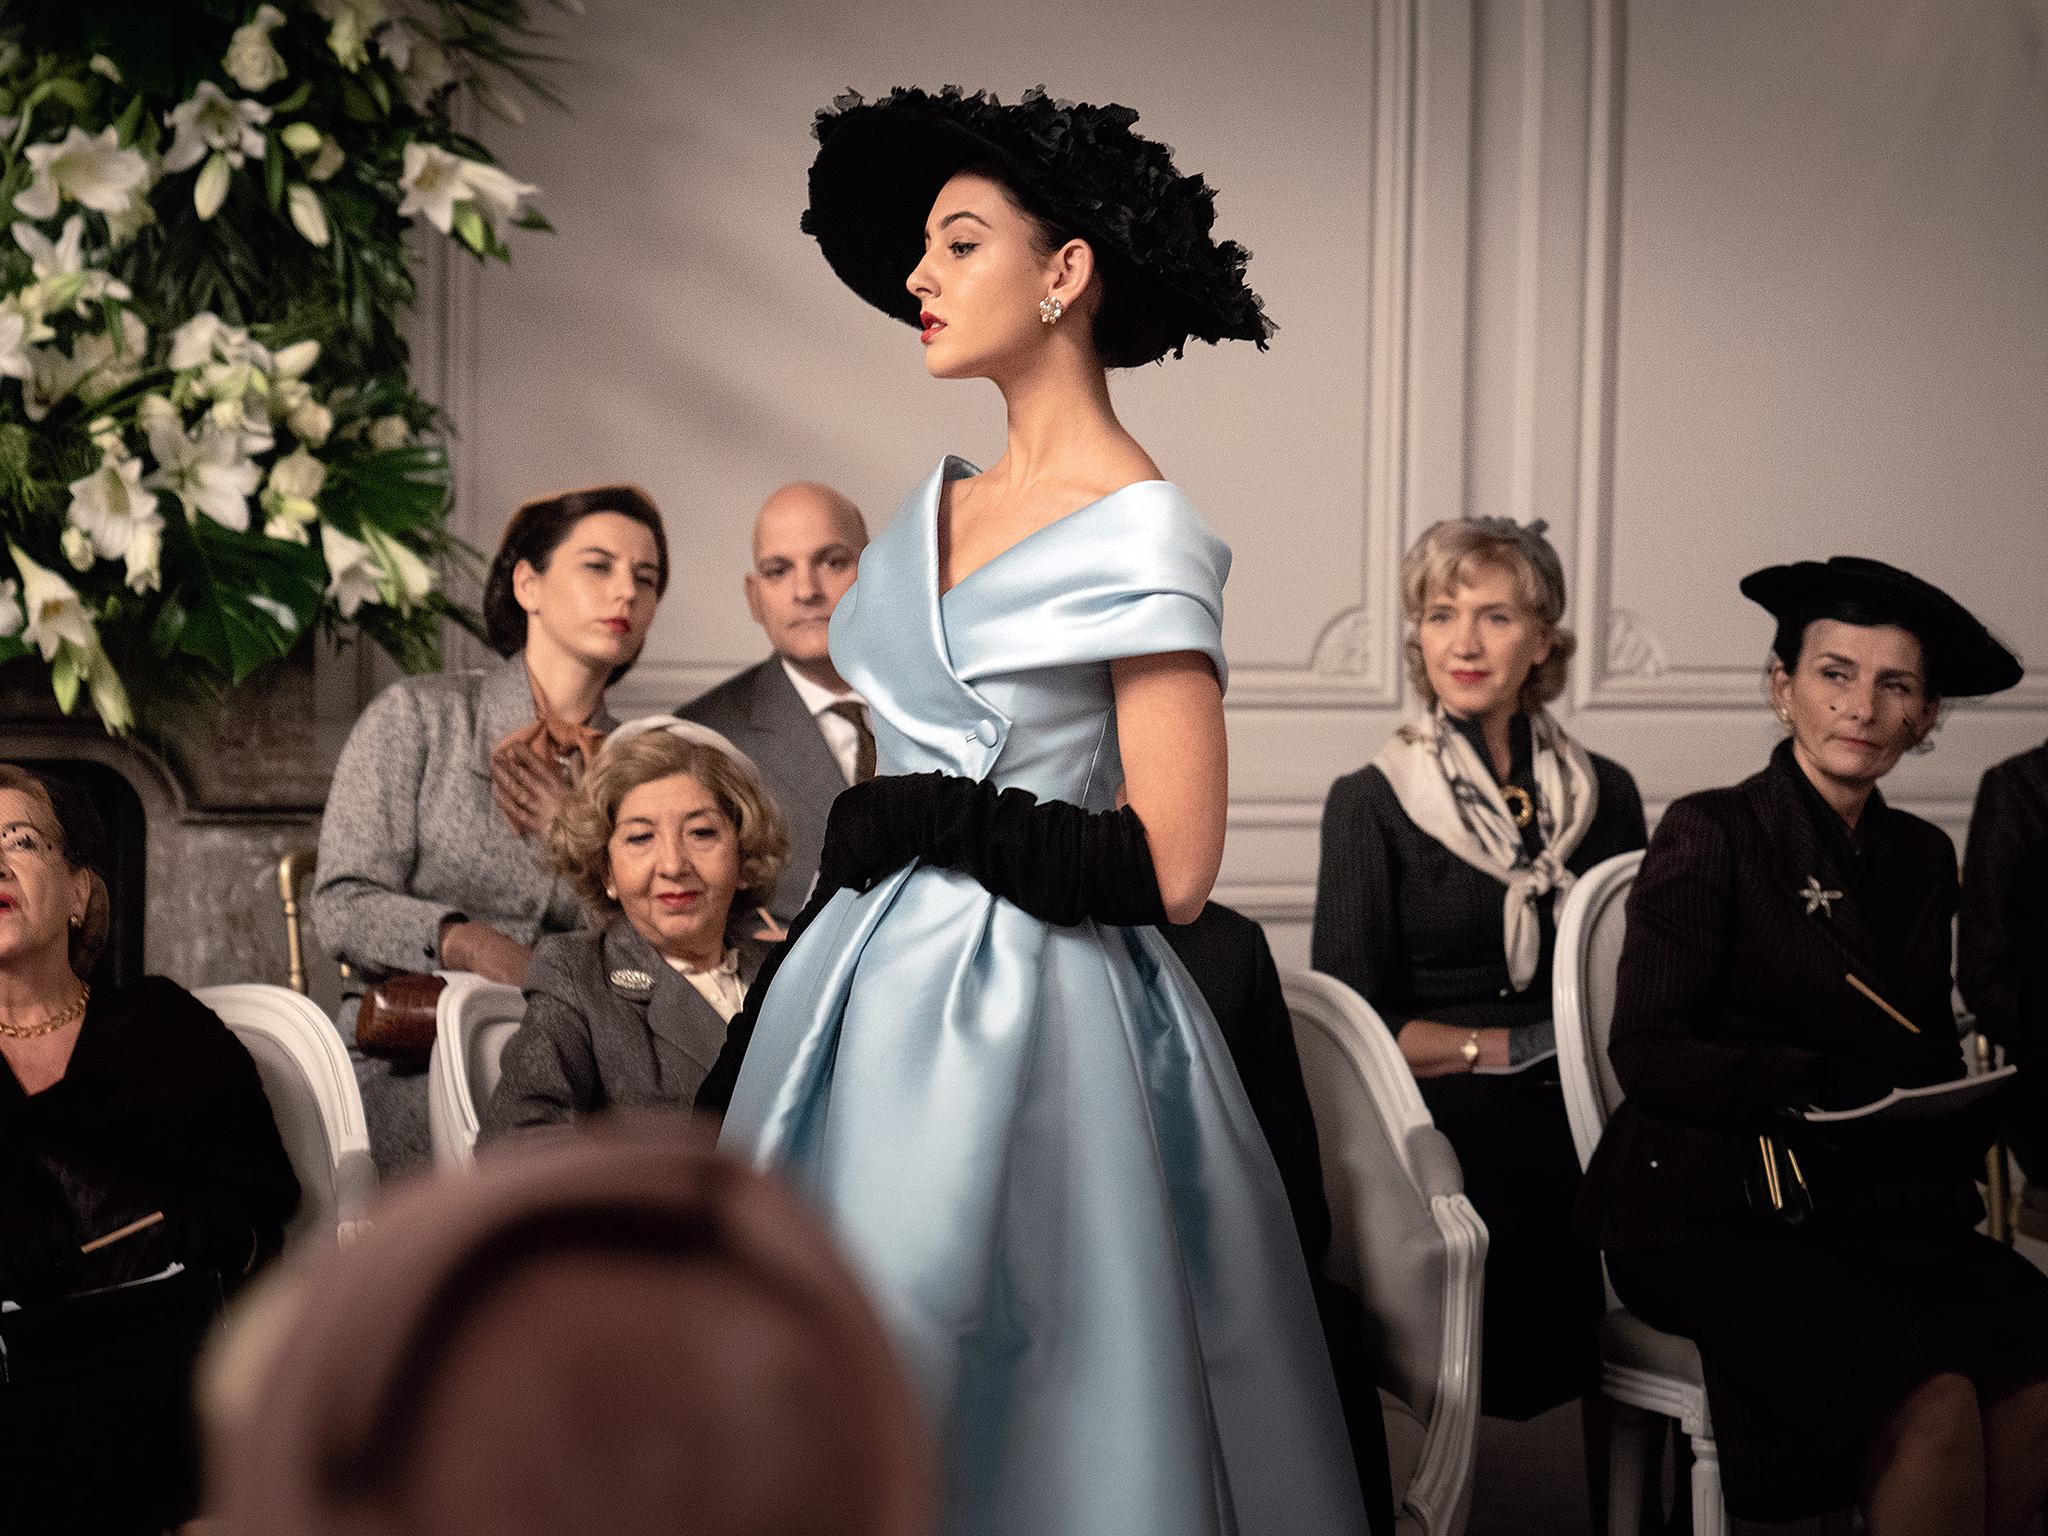 Your Exclusive Look Behind-The-Scenes Of The Miss Dior Dress